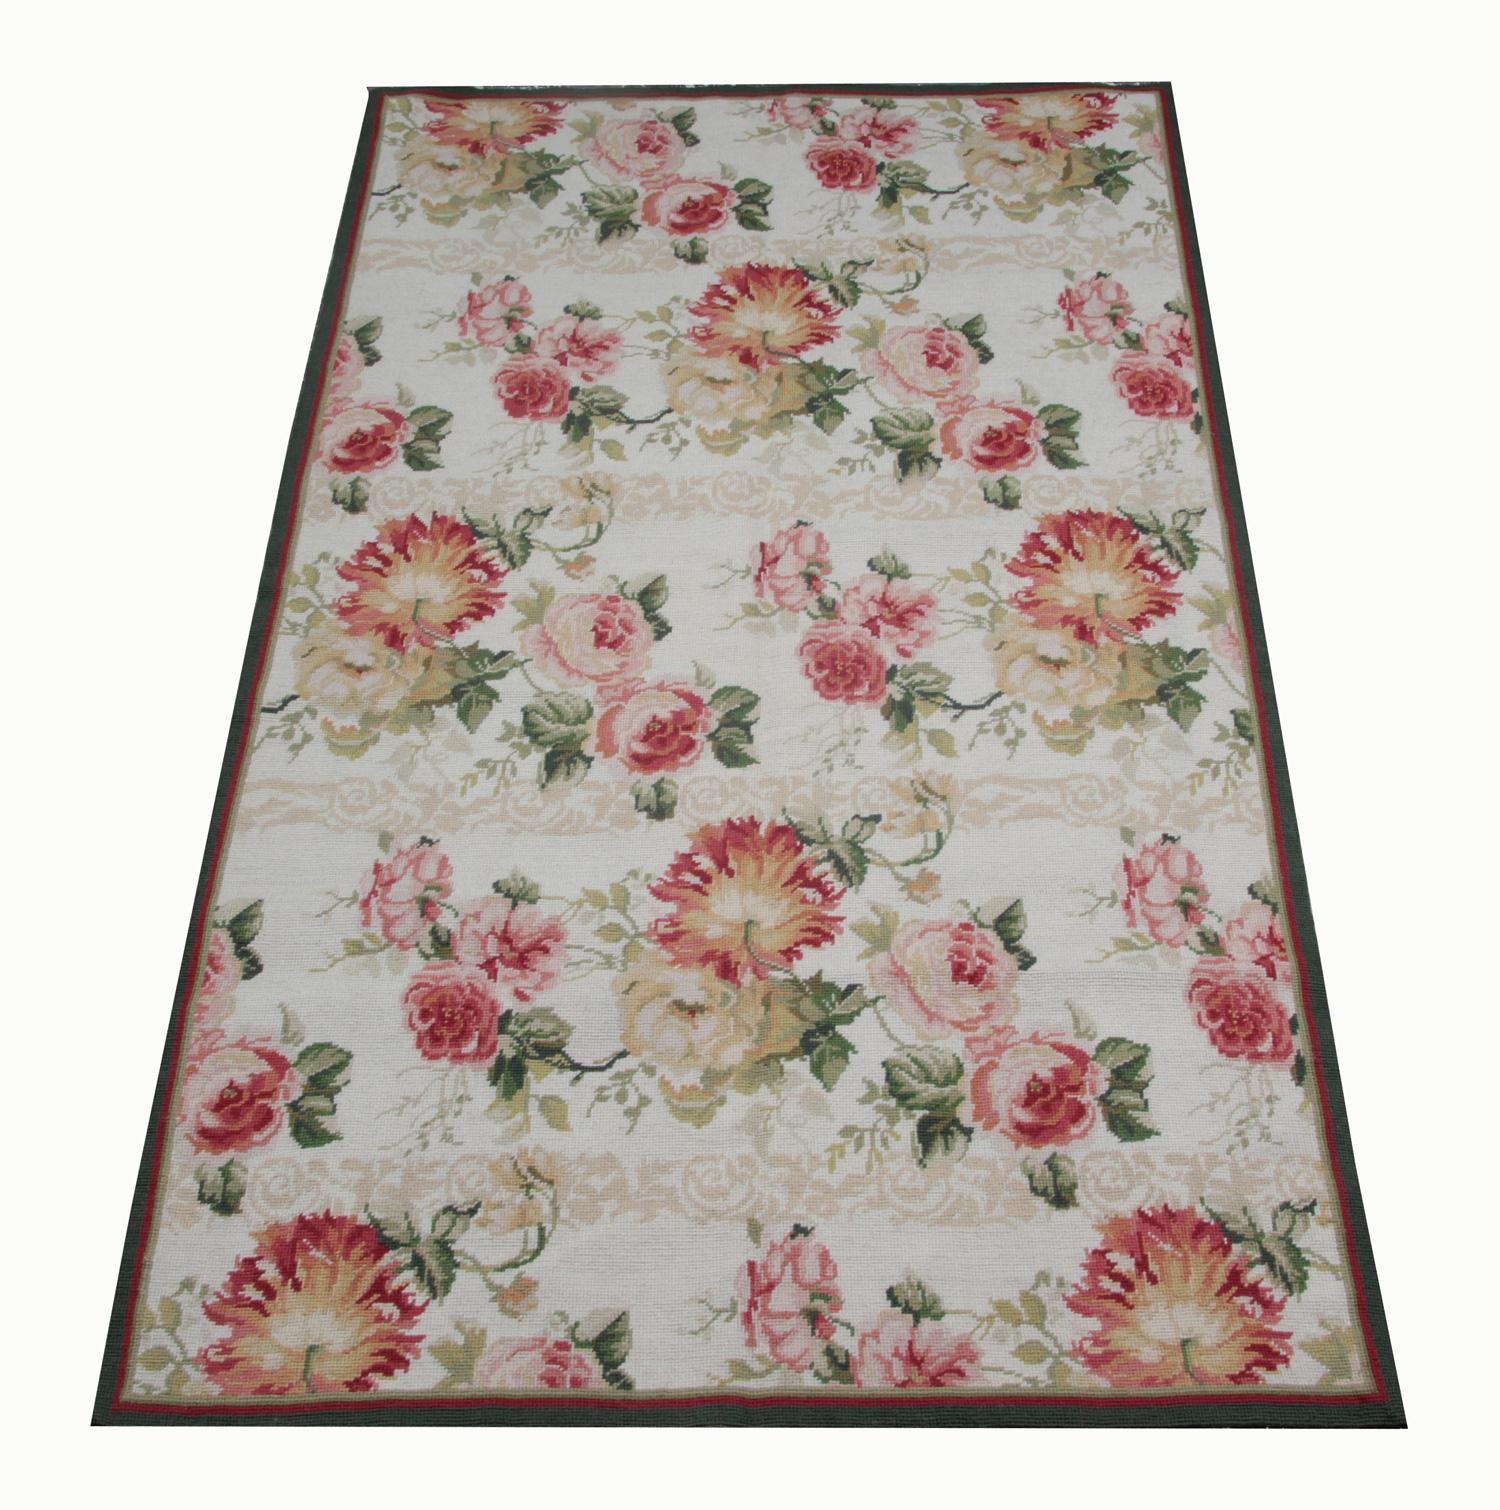 This Beige cream rug is the very good item as living room rugs and getting most of the attention in rug store by clients because of the colour and design. These handmade elegant Chinese Aubusson floor rugs have The soft shade of colours. these